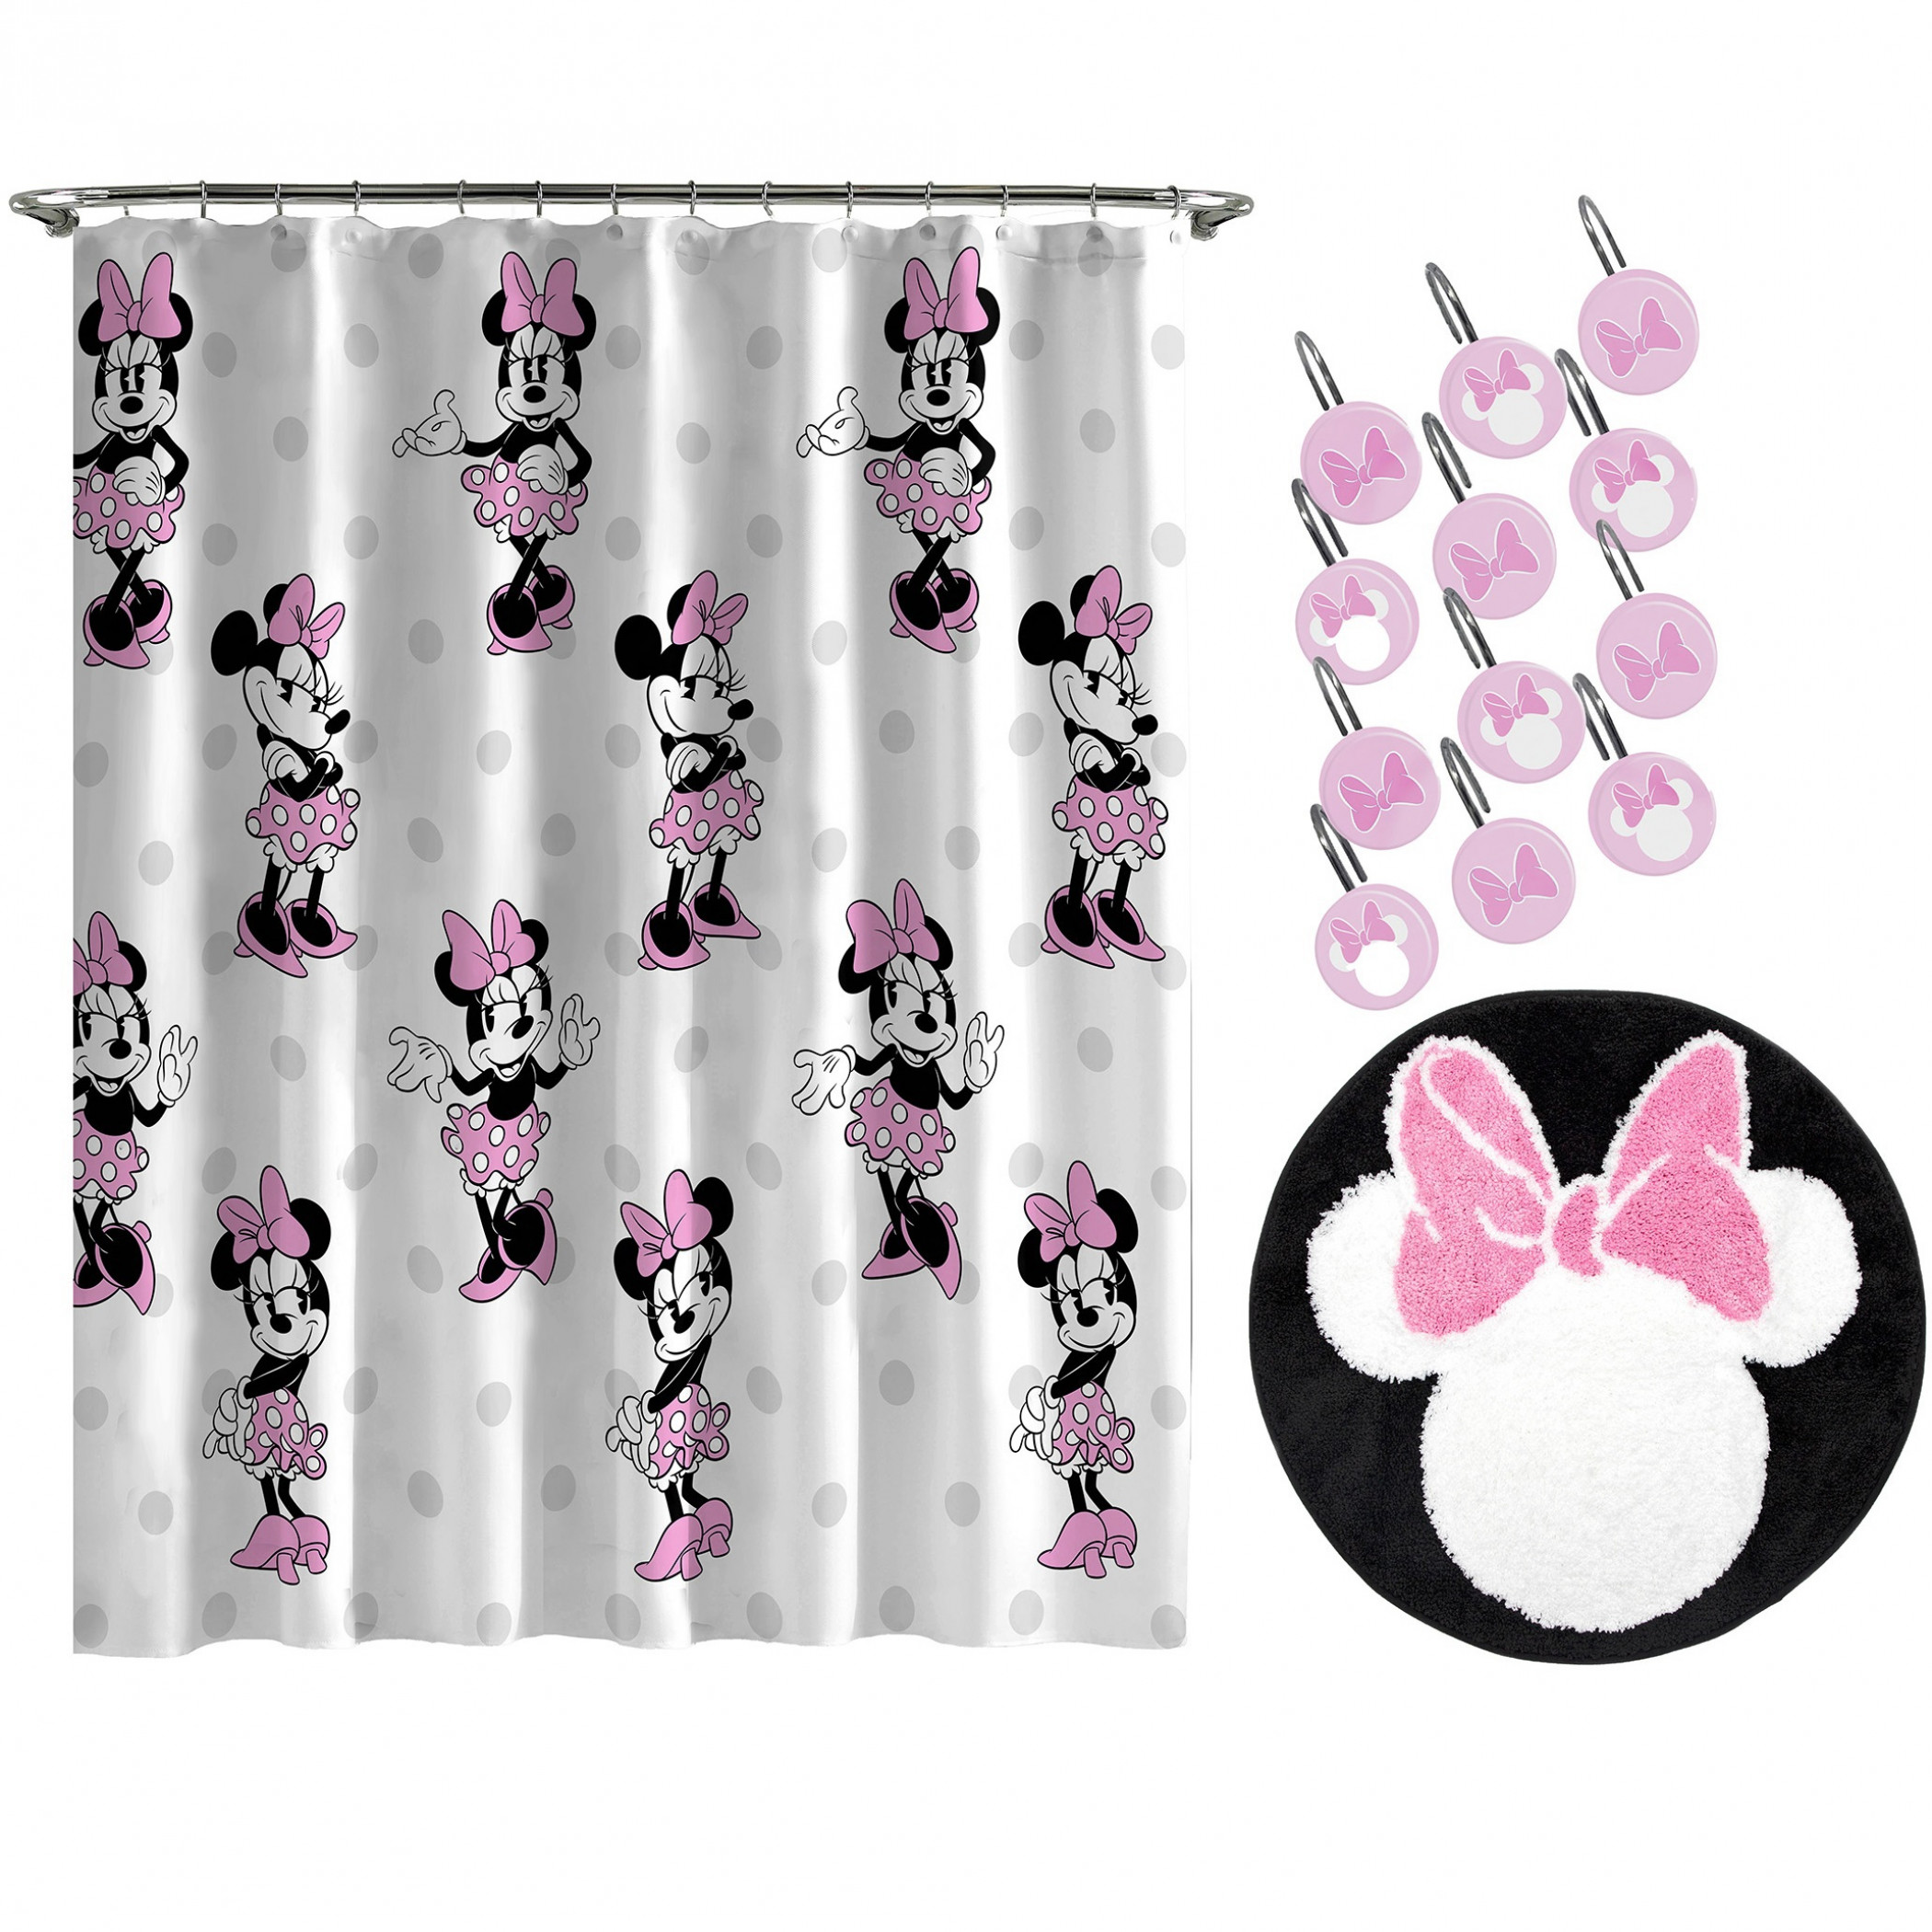 Disney Minnie Mouse All Over Print 14pc Shower Curtain and Rug Set